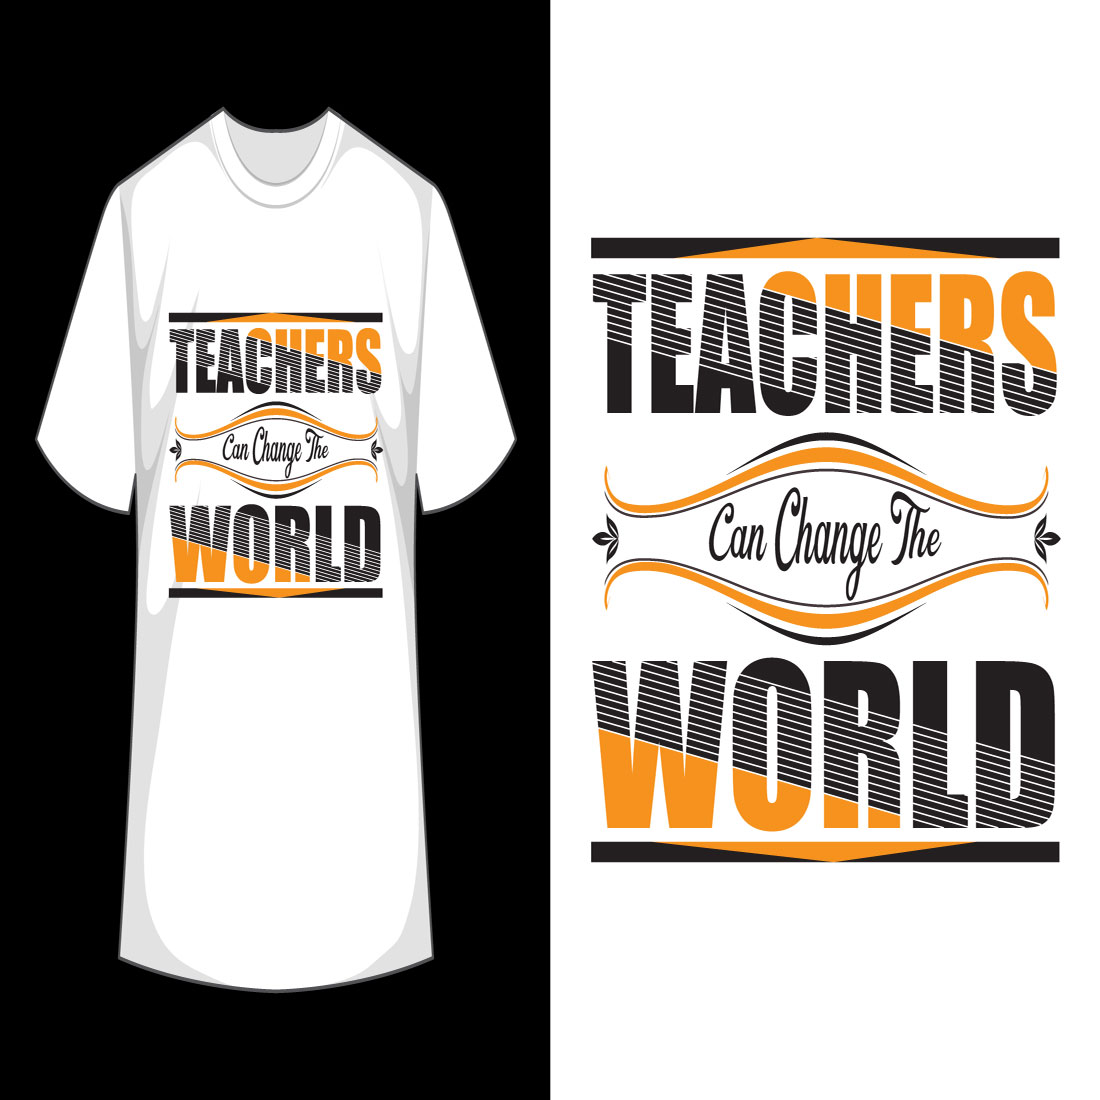 Teachers day T shirt preview image.